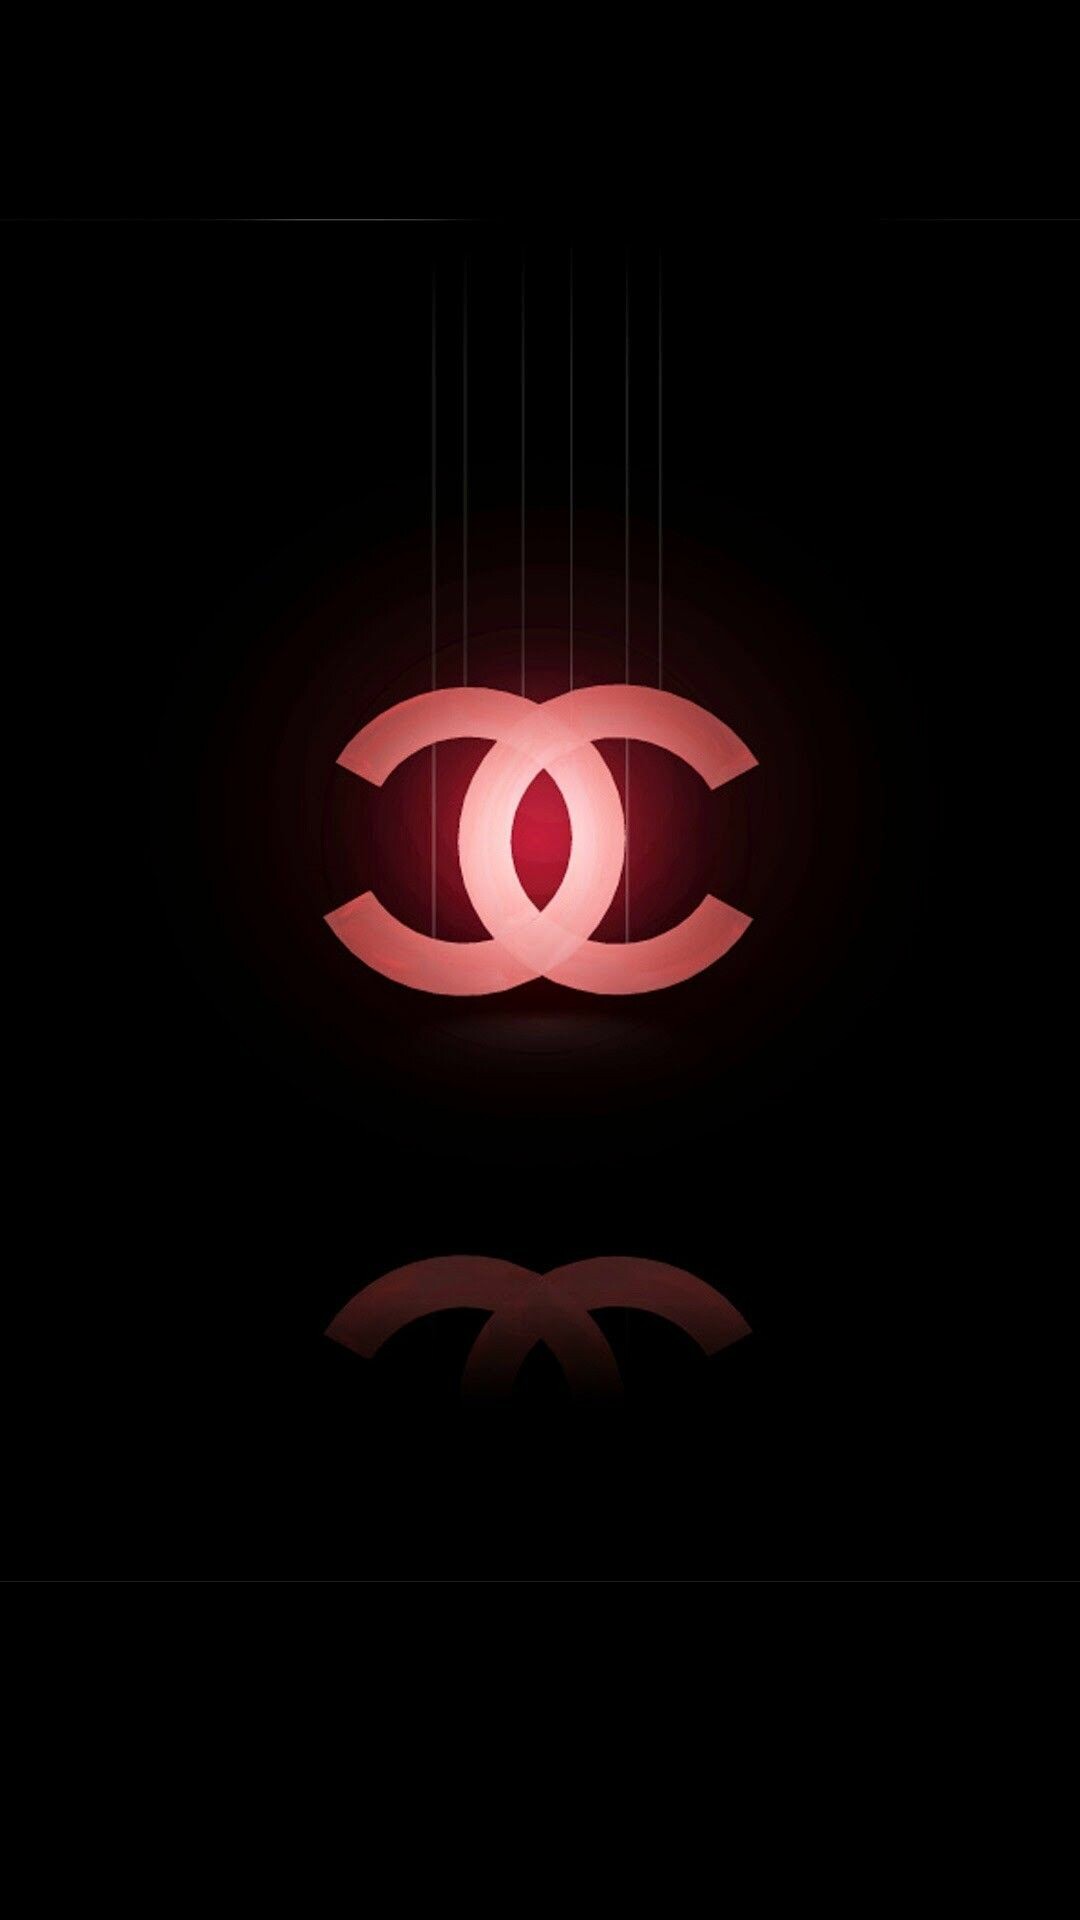 Chanel: A French luxury fashion brand that specializes in haute couture and ready-to-wear clothes, luxury goods, and fashion accessories. 1080x1920 Full HD Background.